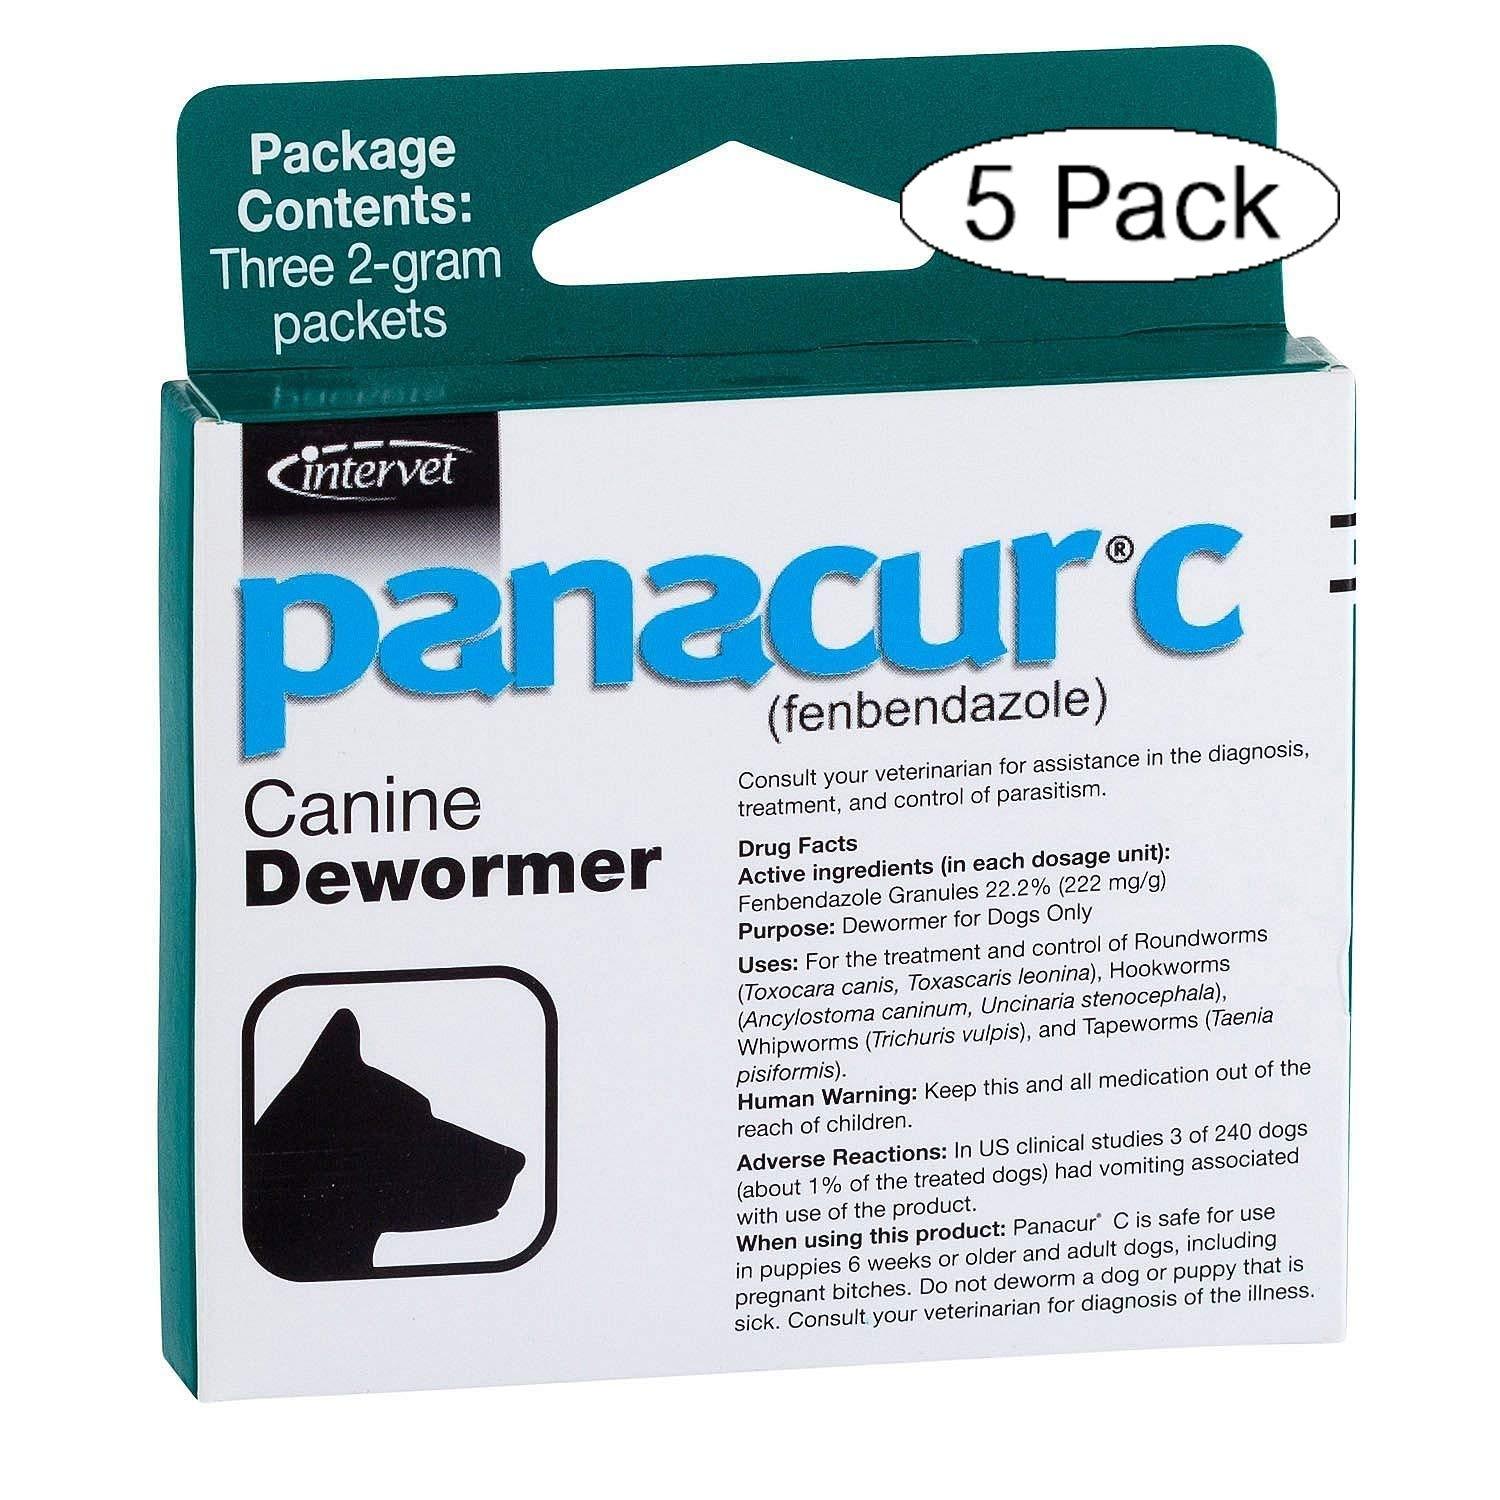 Panacur C Canine Dewormer Dogs 2 Gram Each Packet Treats 20 lbs (3 Packets) (Fiv? ???k)